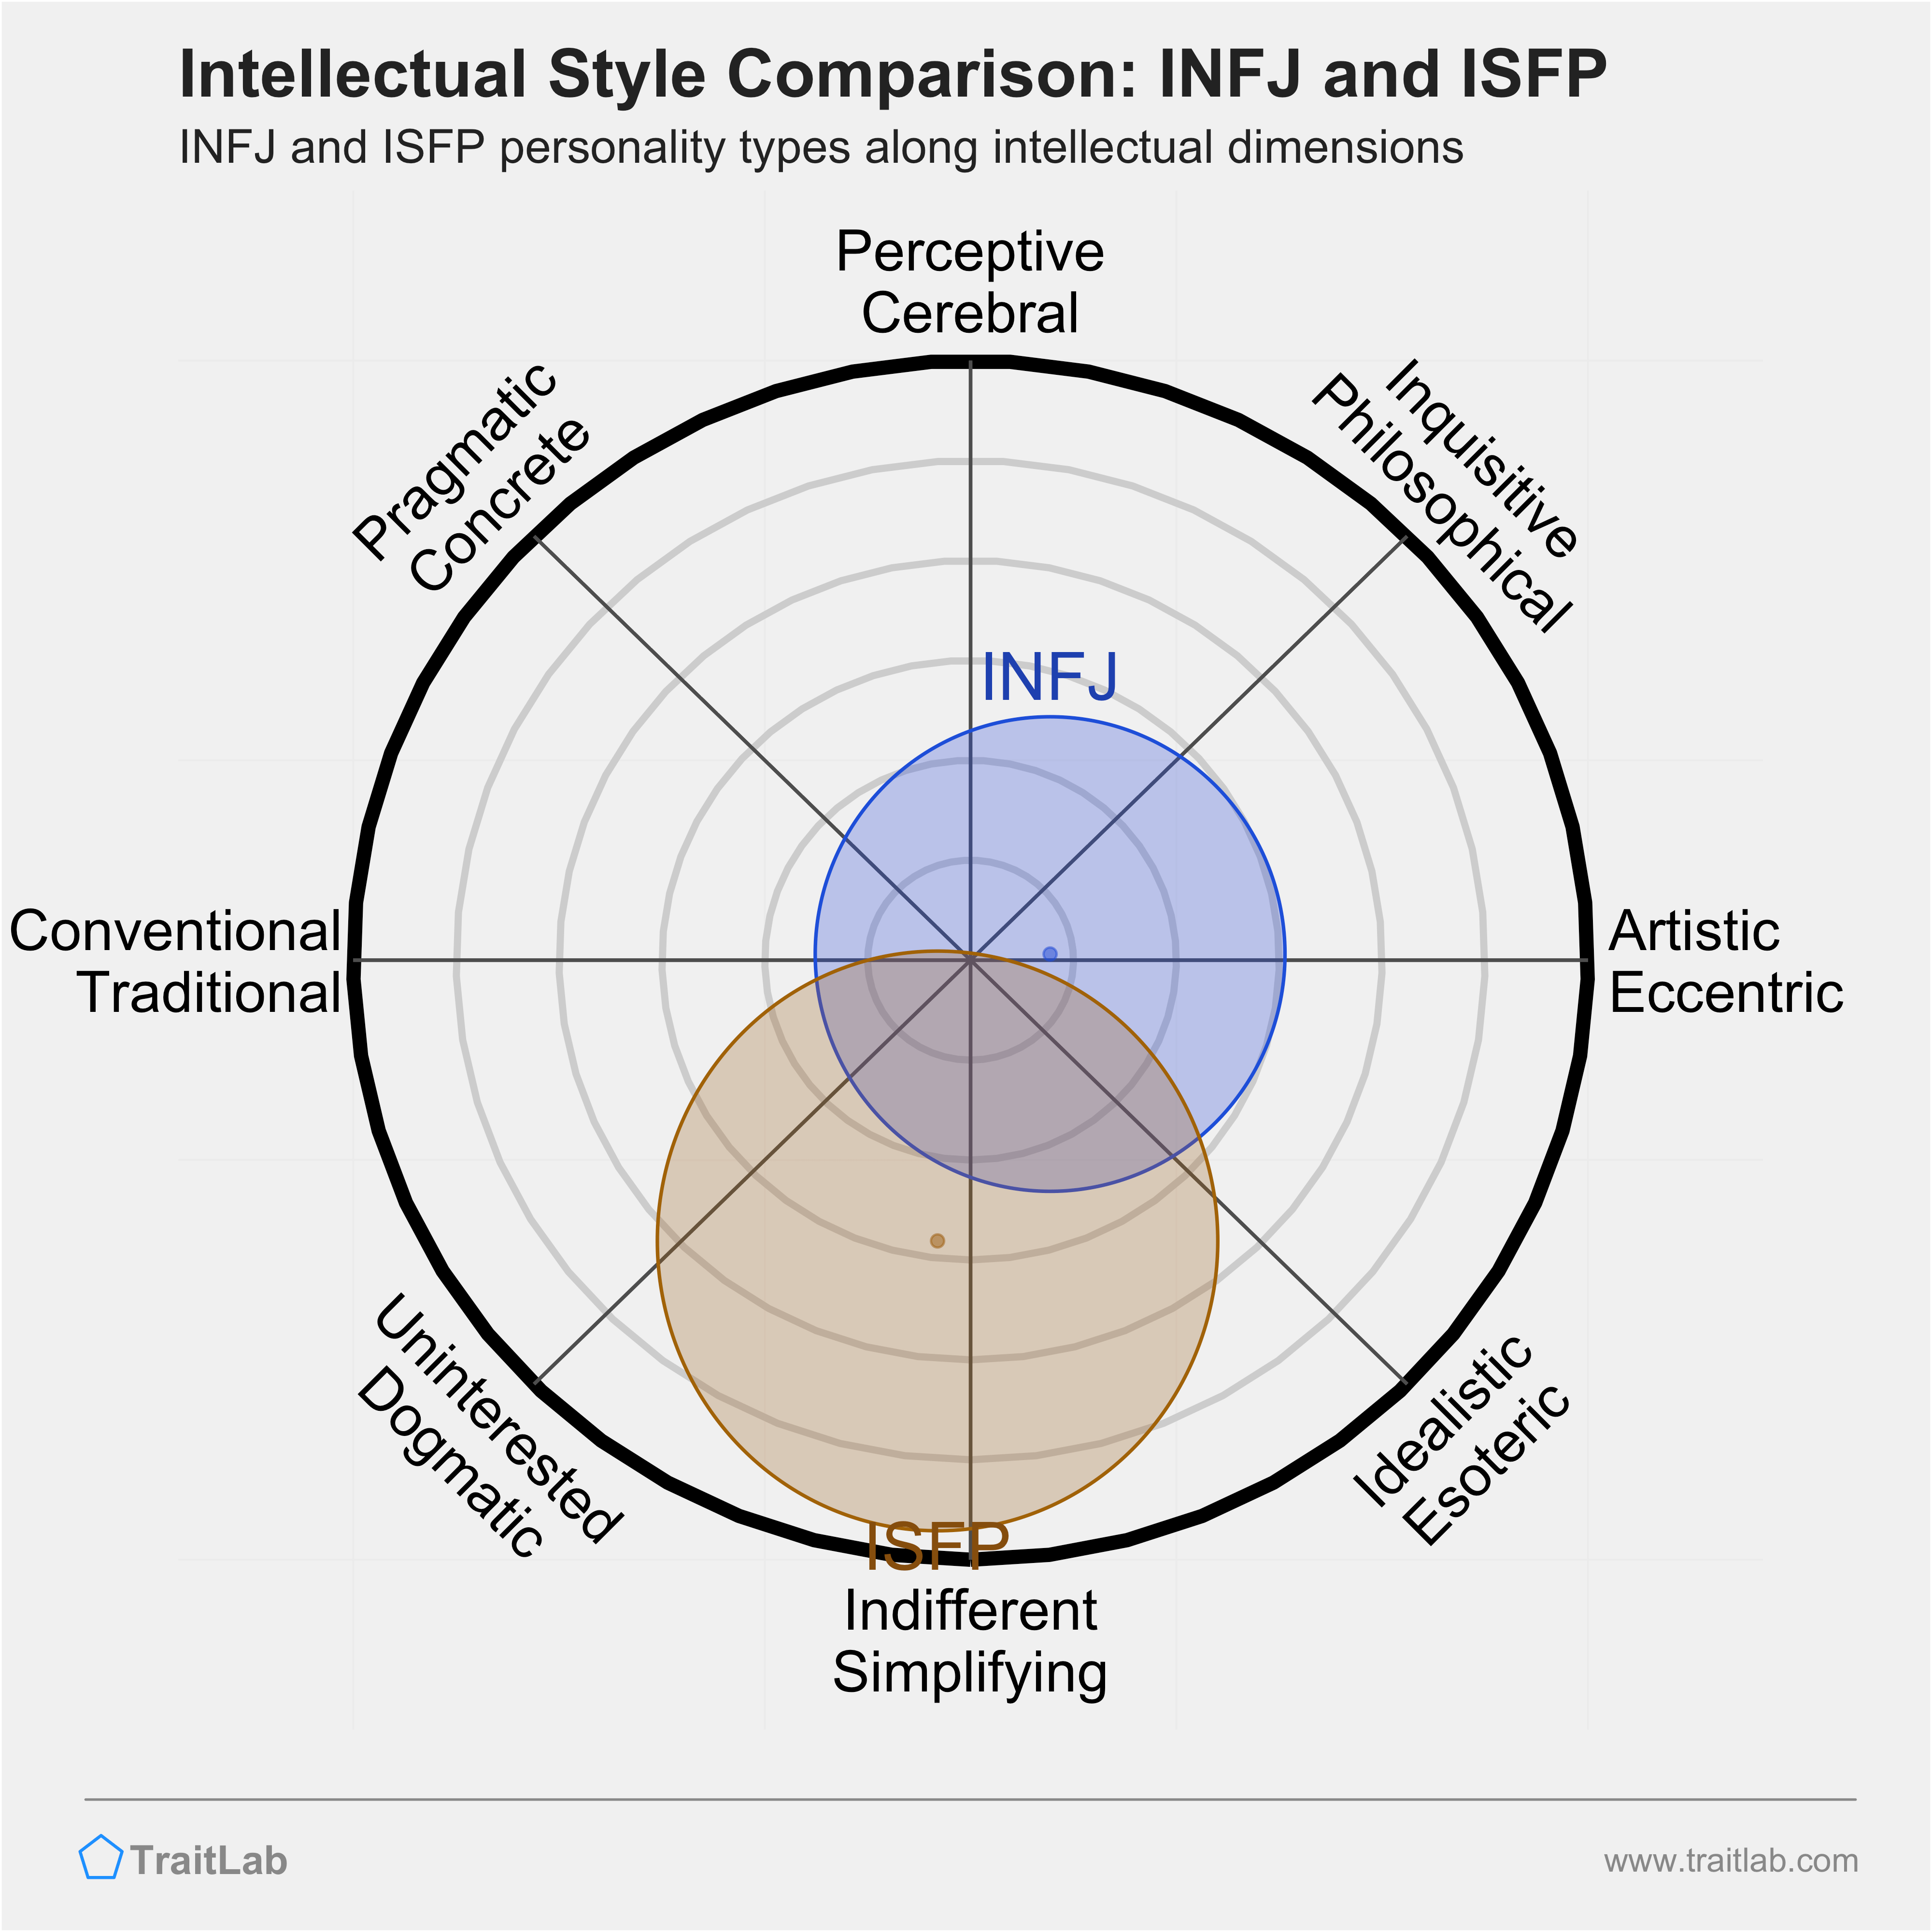 INFJ and ISFP comparison across intellectual dimensions